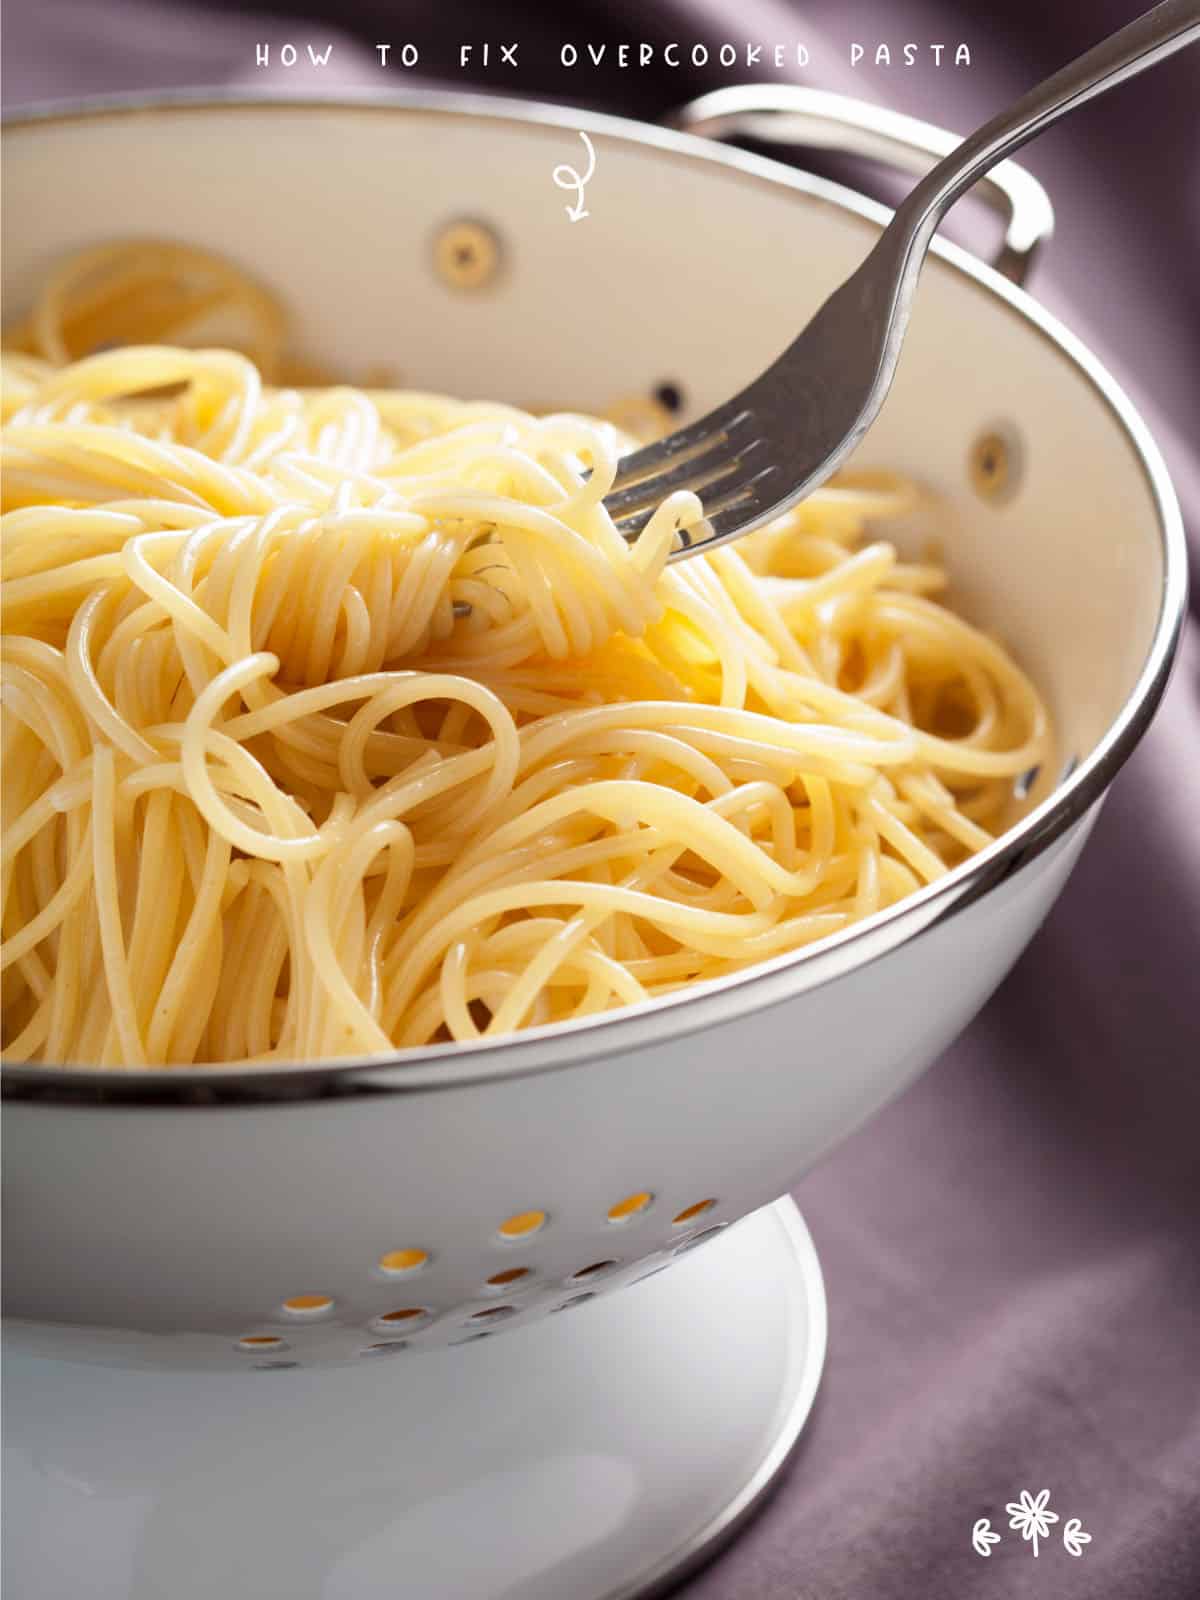 Overcooked pasta will be mushy and will often stick together in a clump. The noodles will also be darker in color than they were when they started cooking.